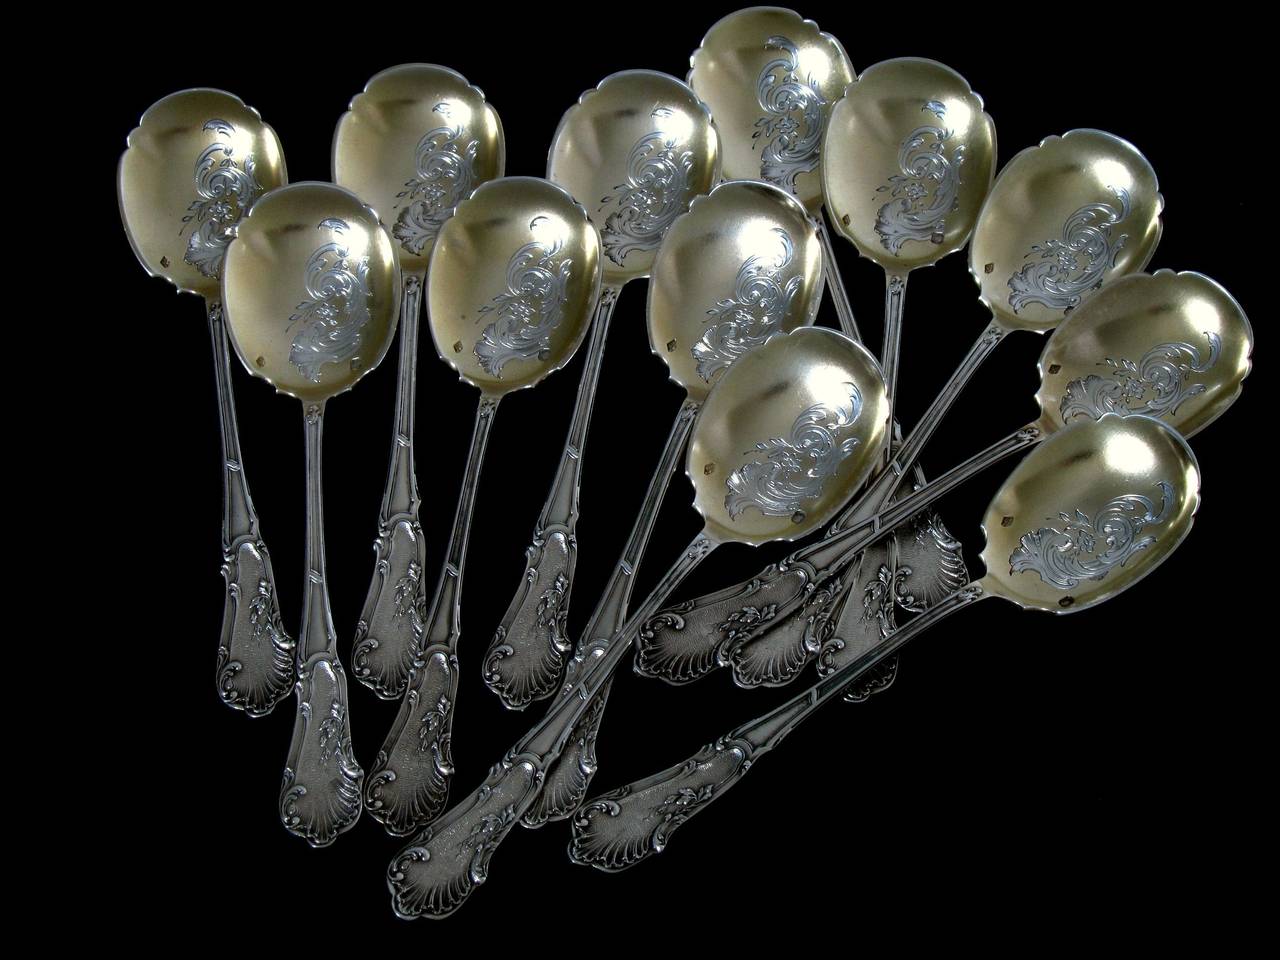 Soufflot French All Sterling Silver Vermeil Ice Cream Spoons Set 12 pc Rococo In Good Condition For Sale In Triaize, Pays de Loire